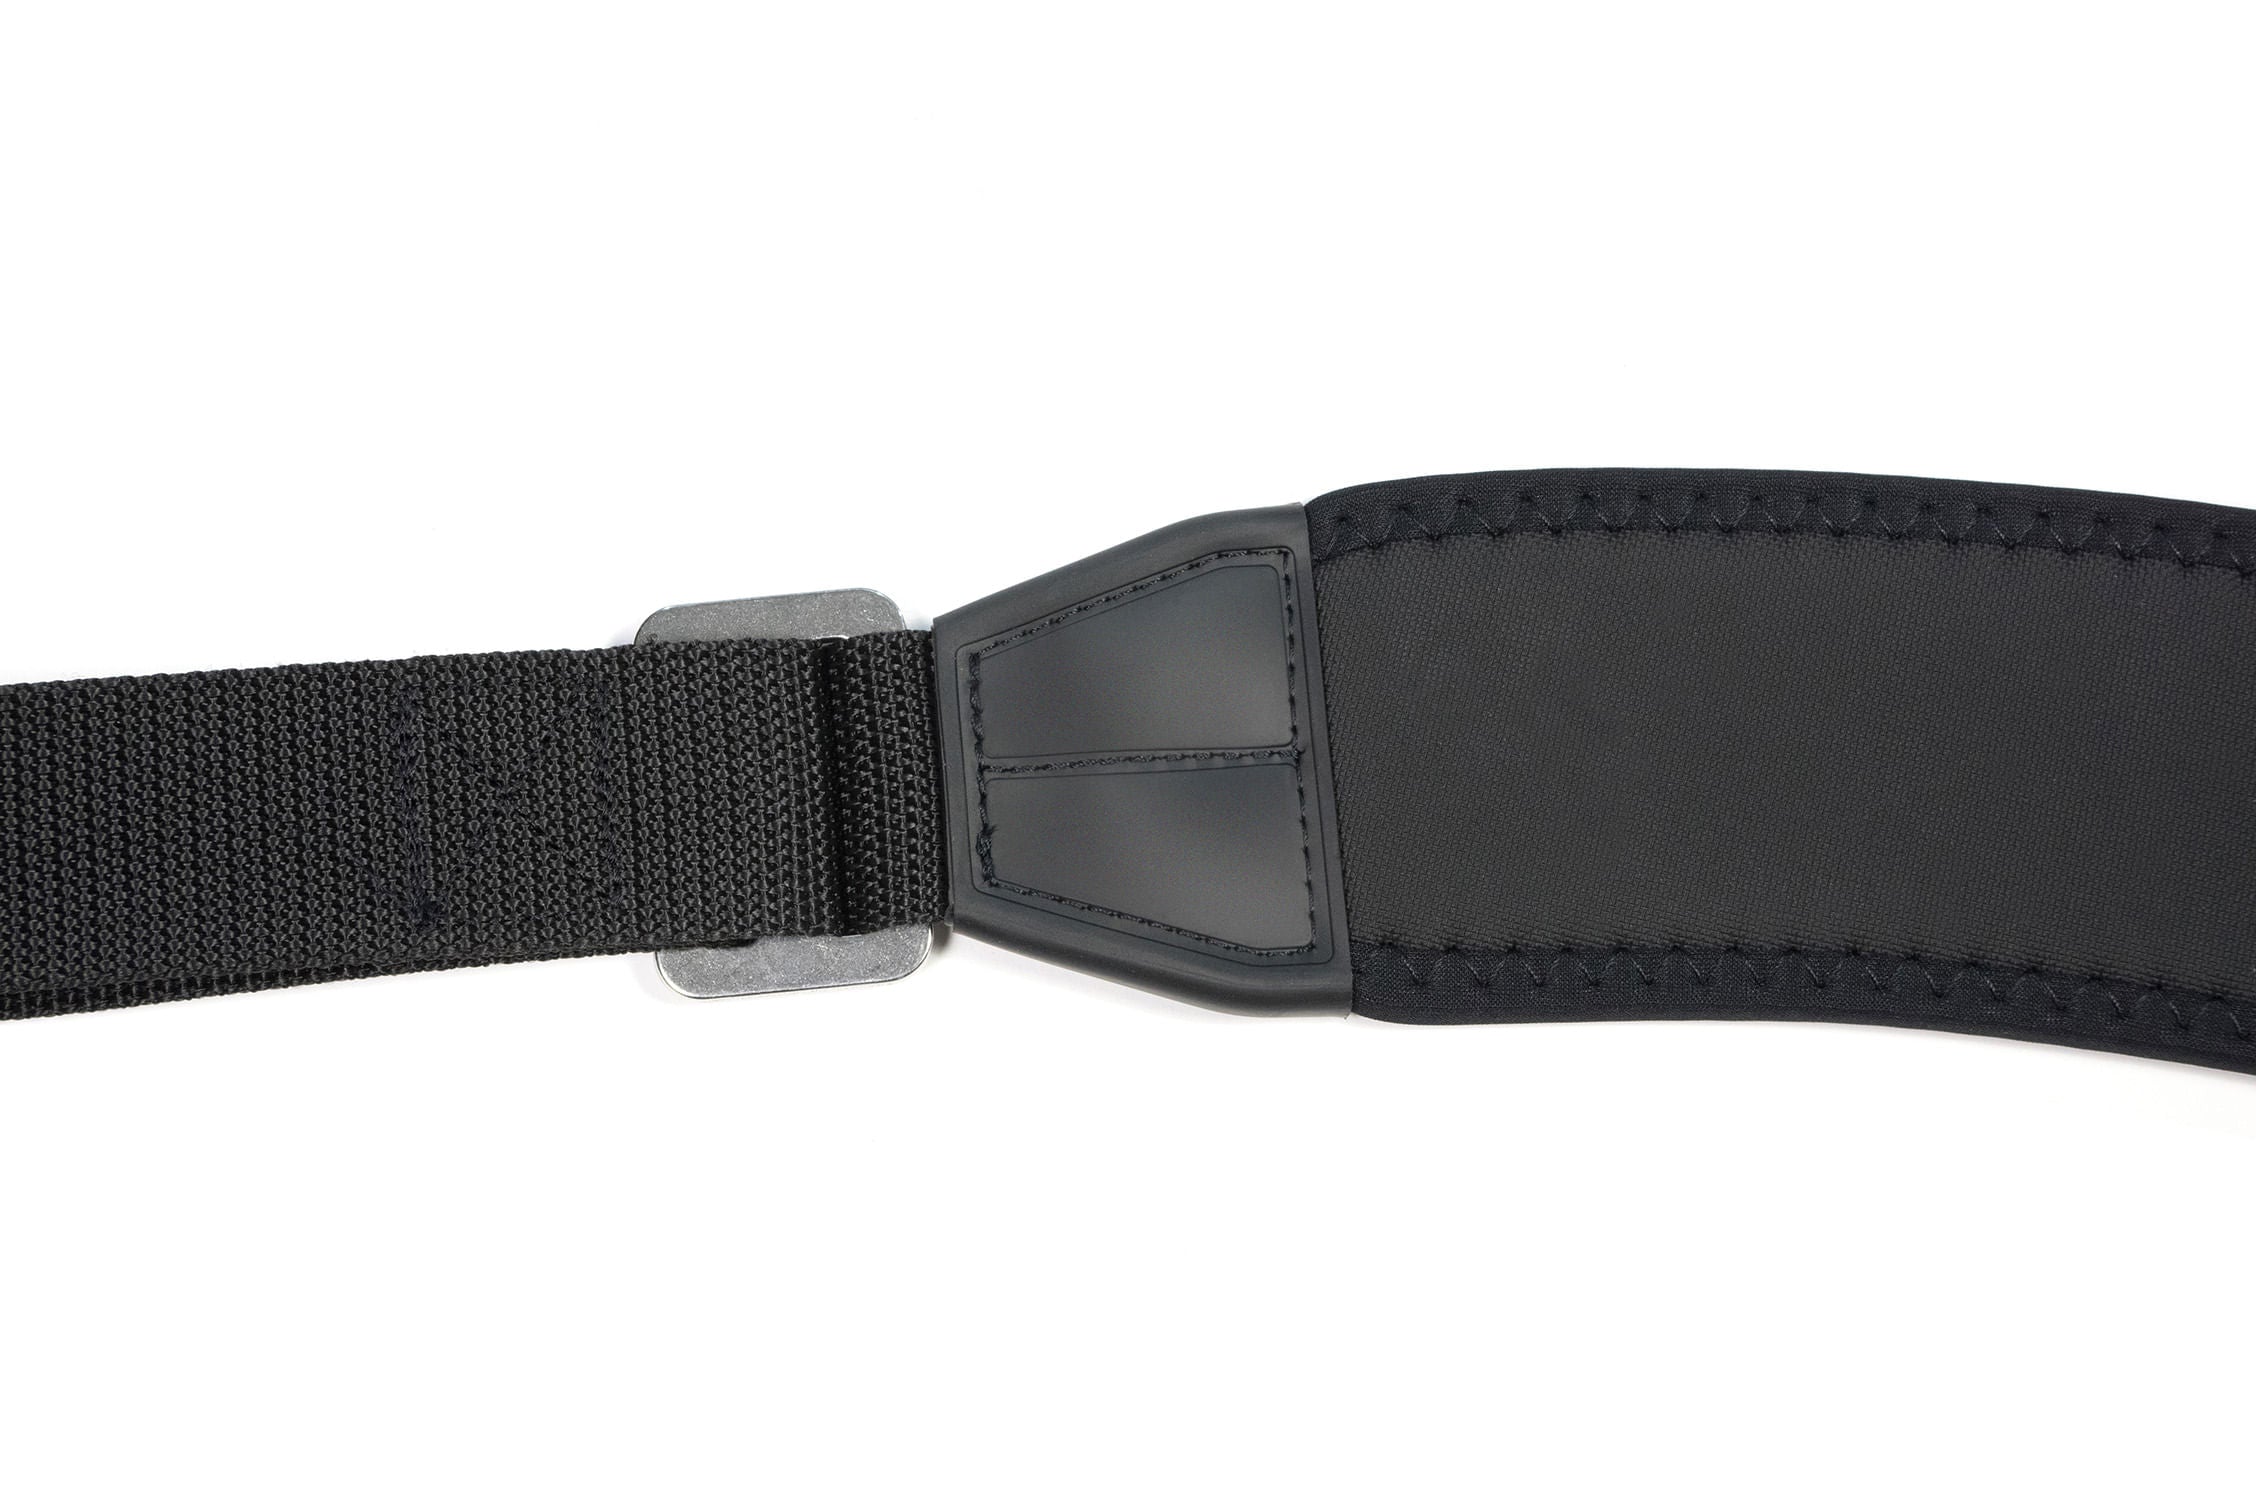 External Luggage Compression Strap by Red Oxx Mfg. Under $9.00.